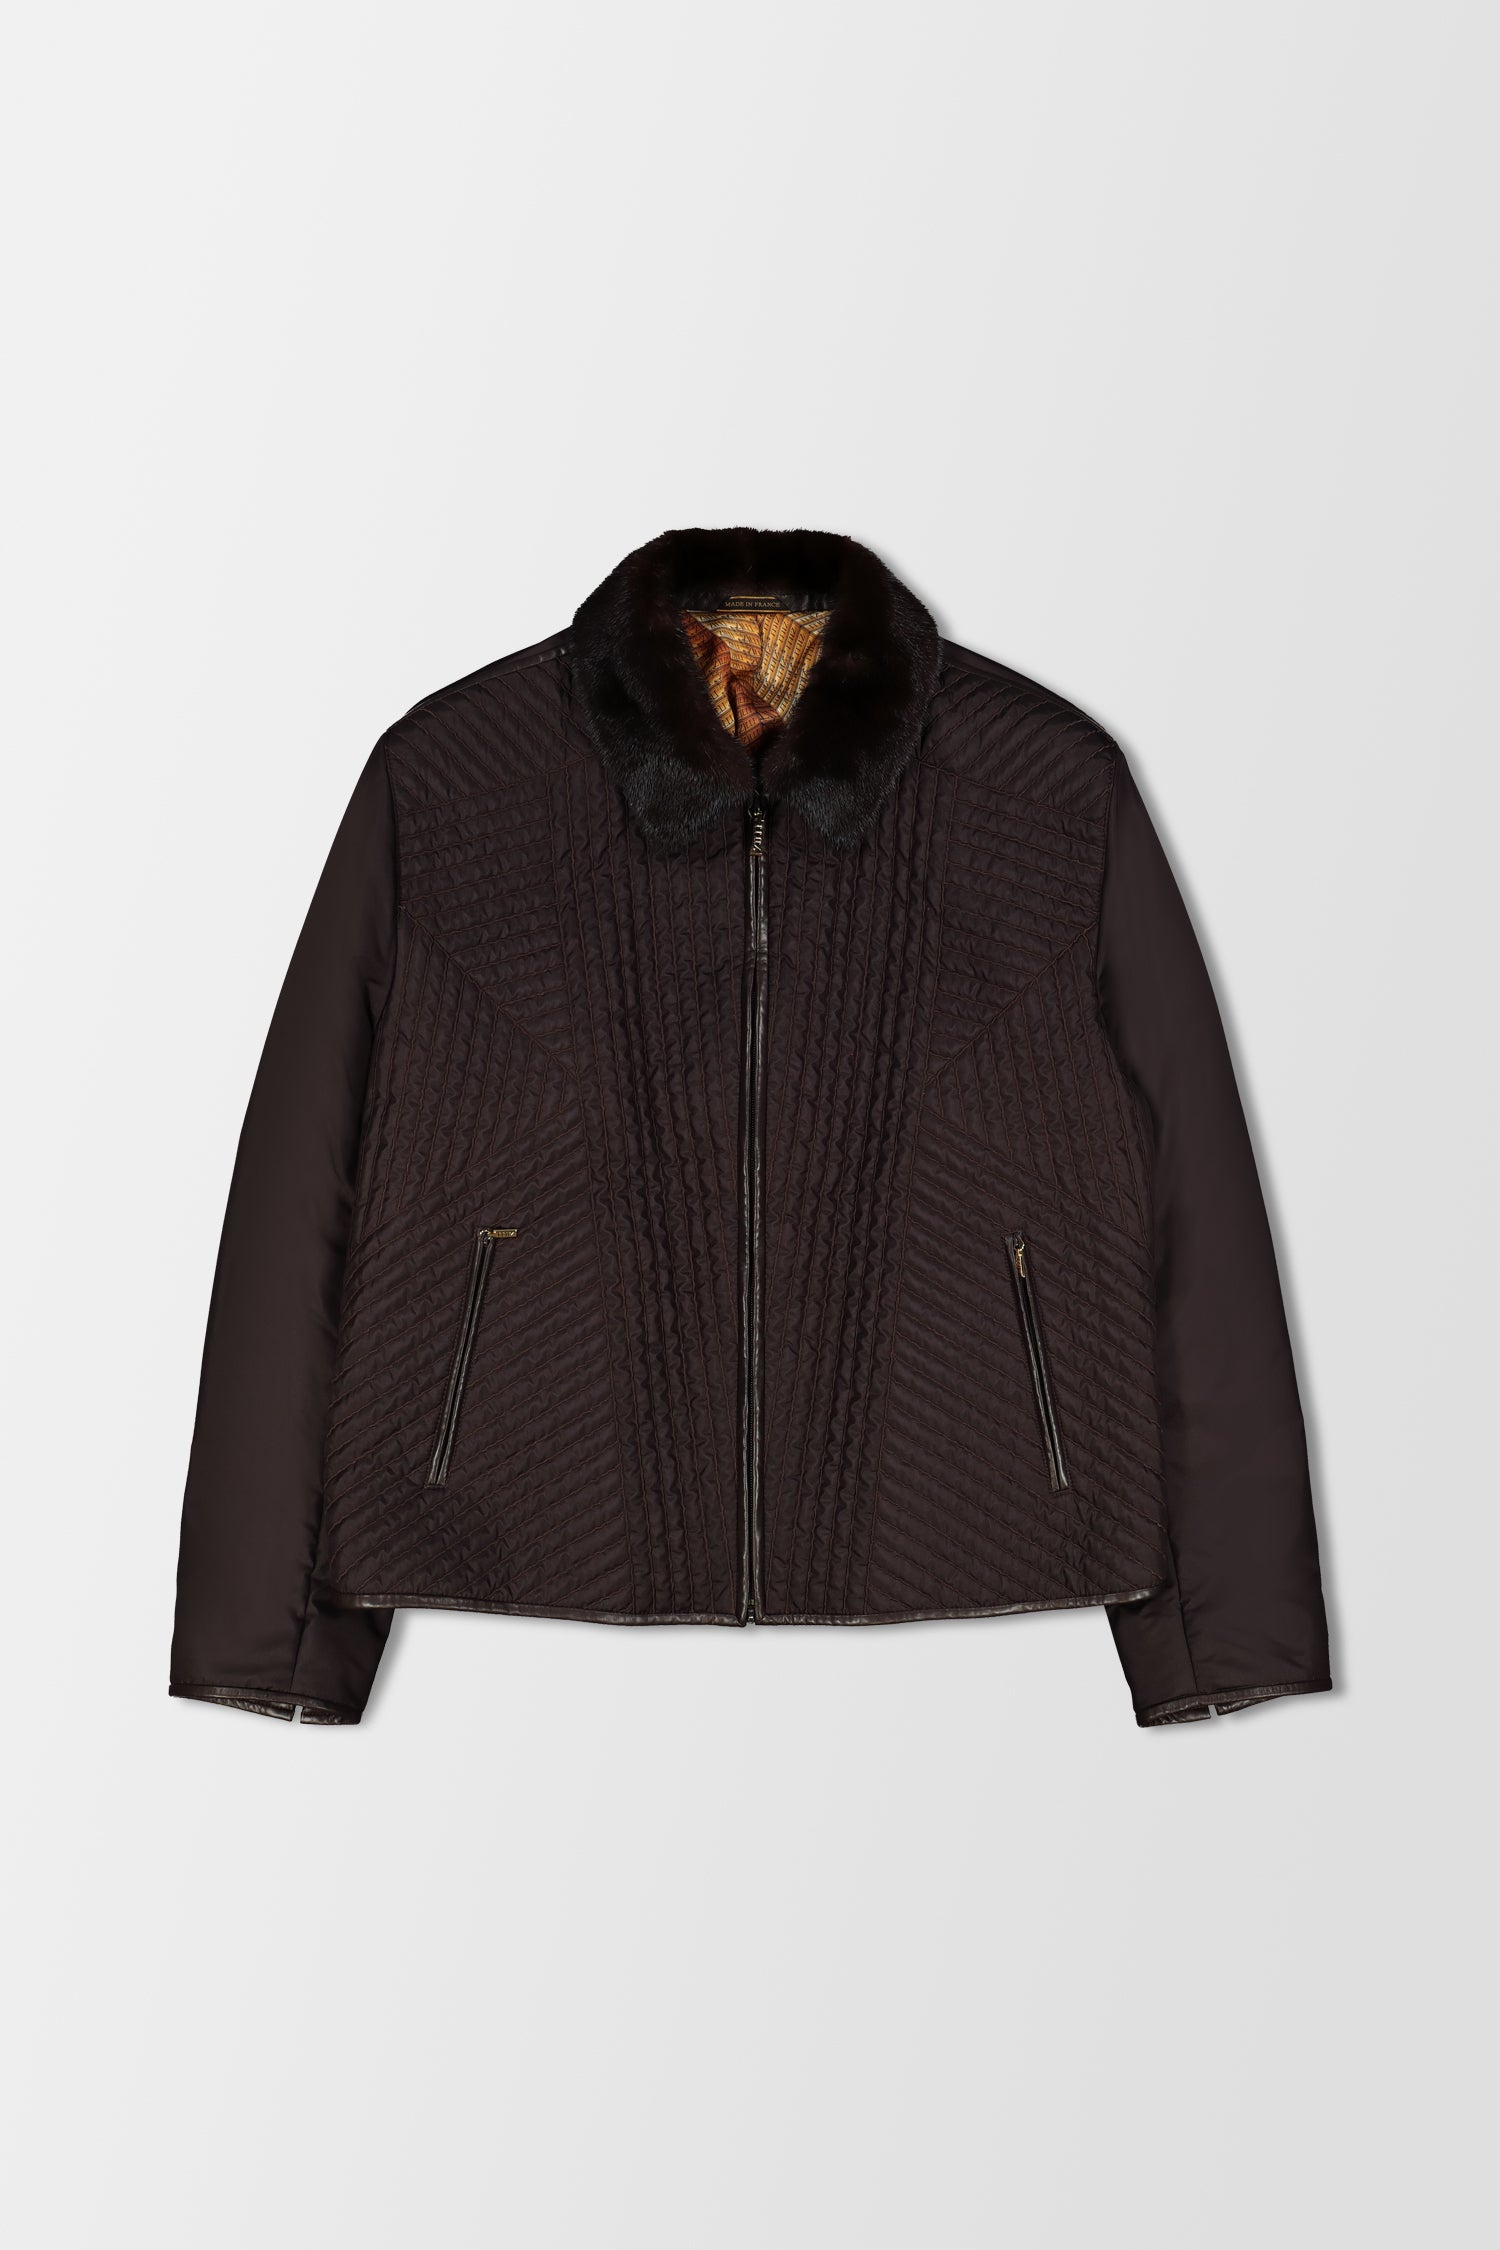 Zilli Brown Quilted Jacket